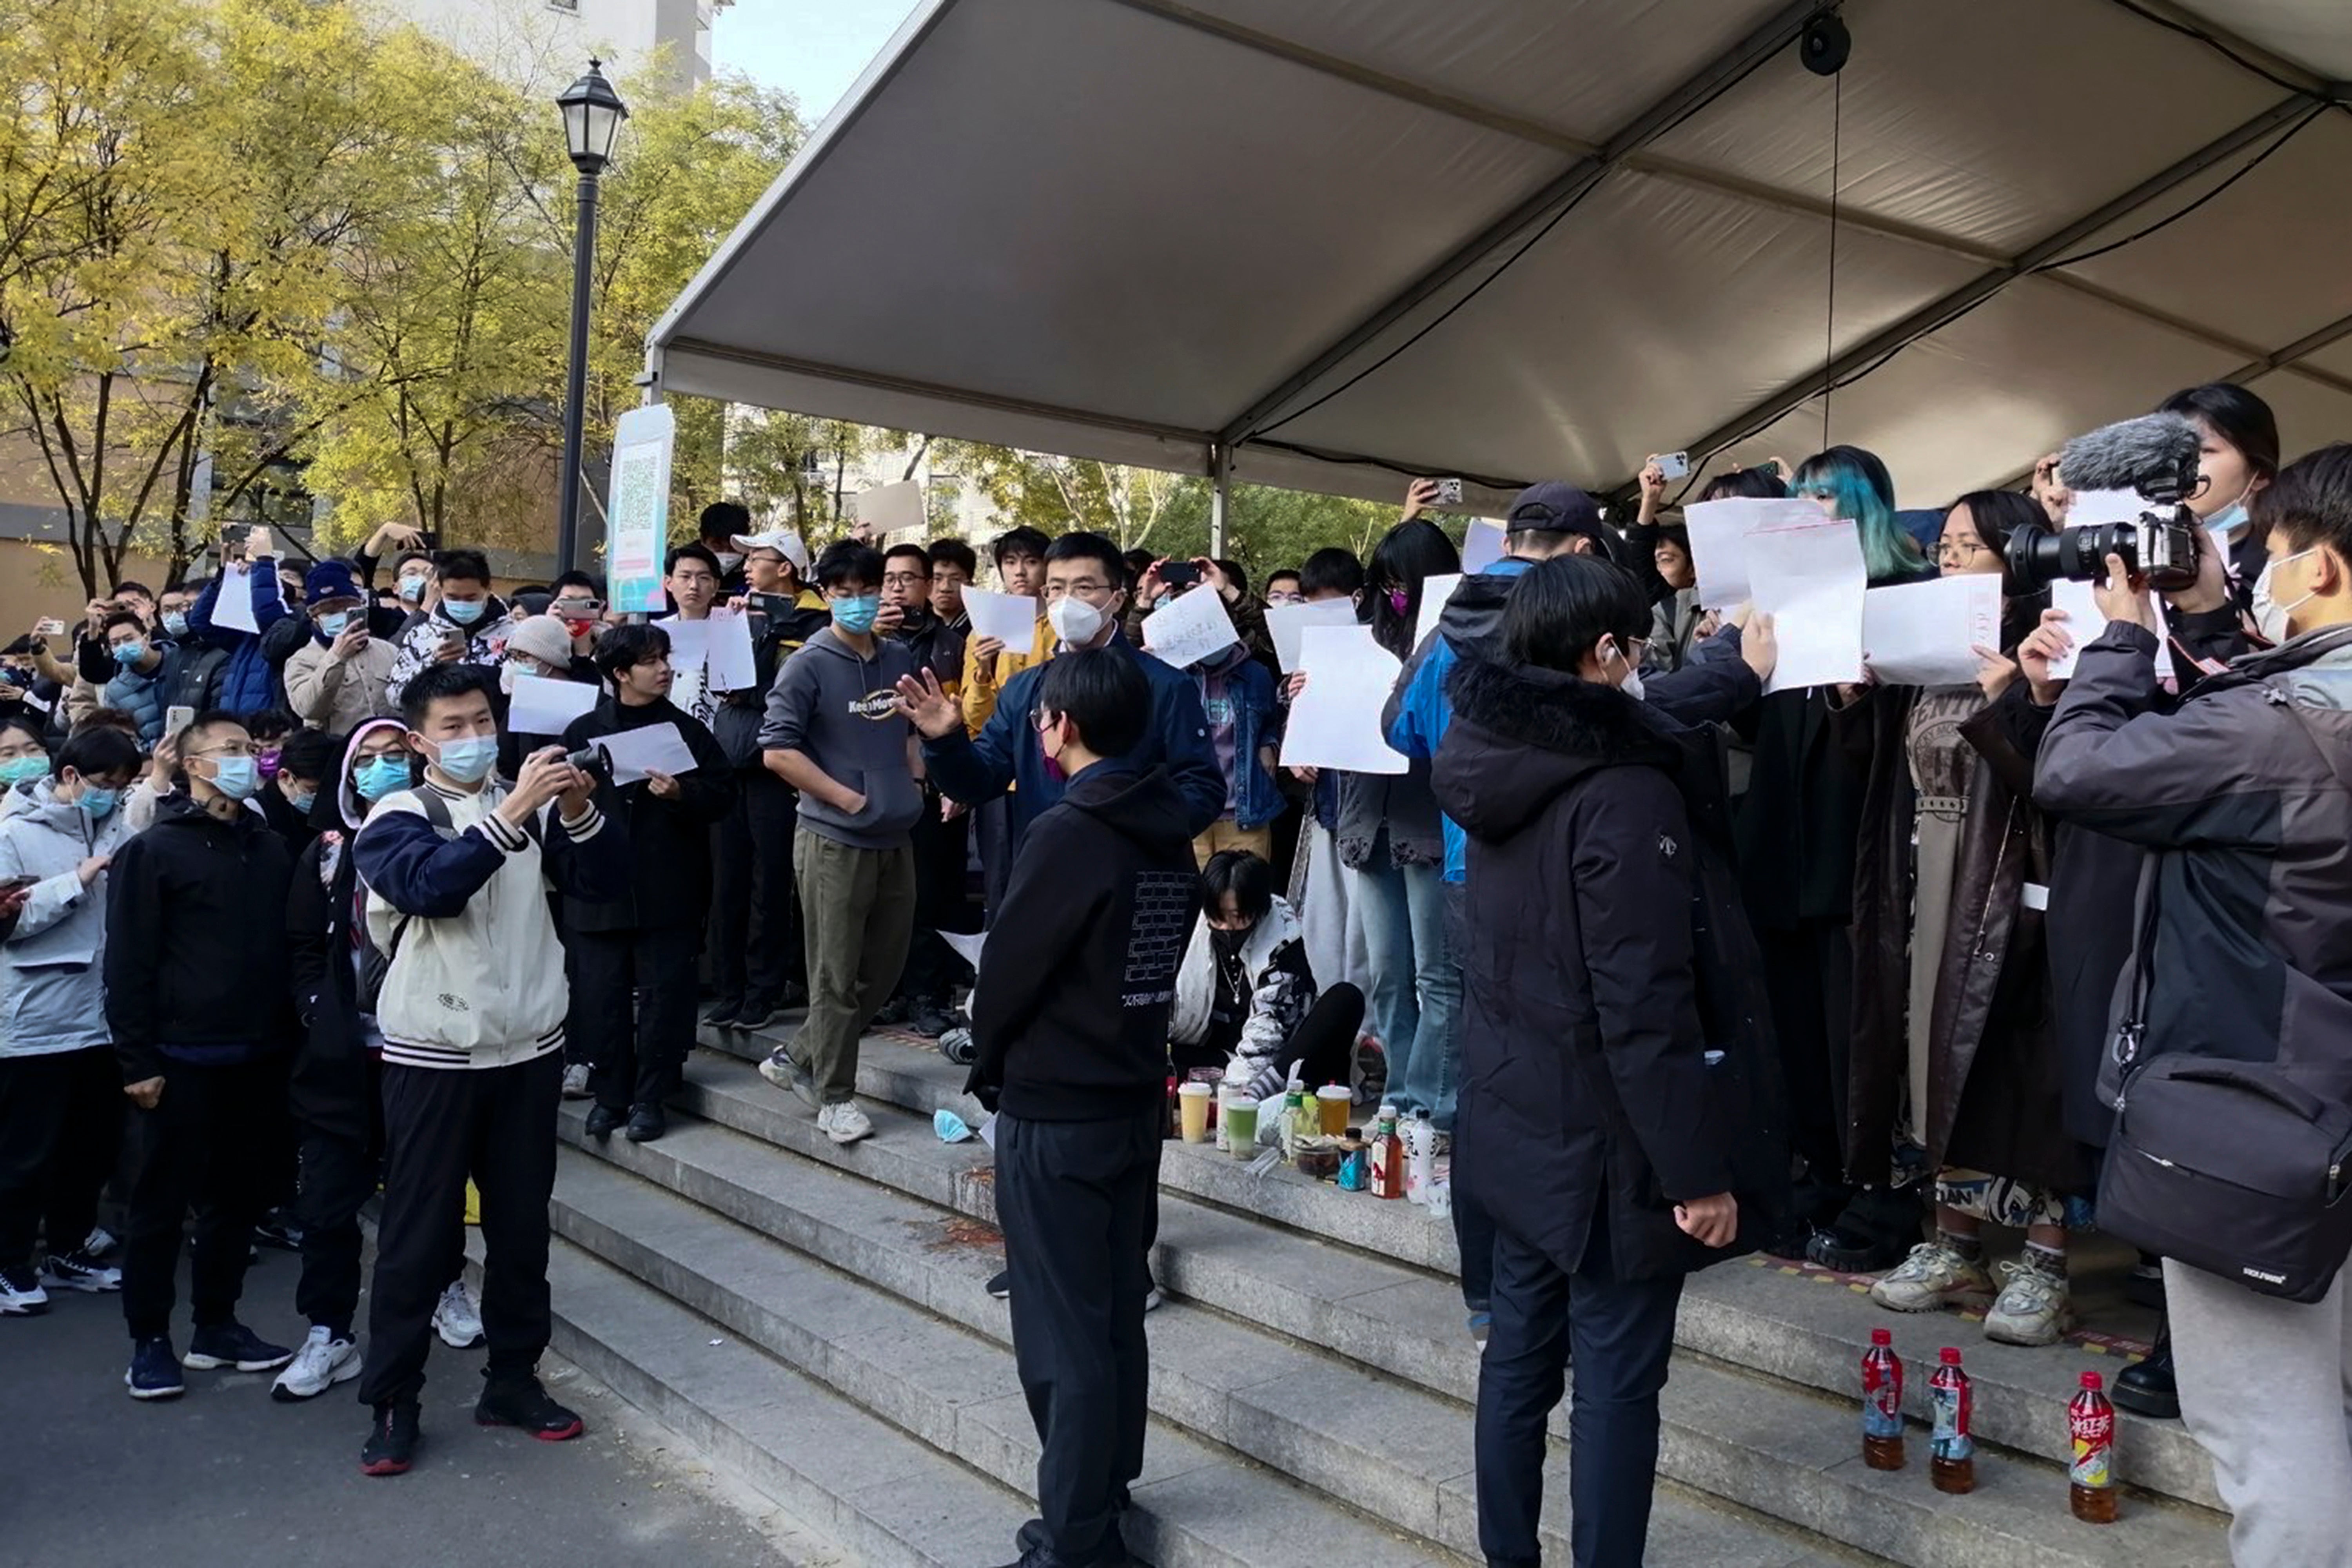 Students stage a protest at Tsinghua University in Beijing on Sunday